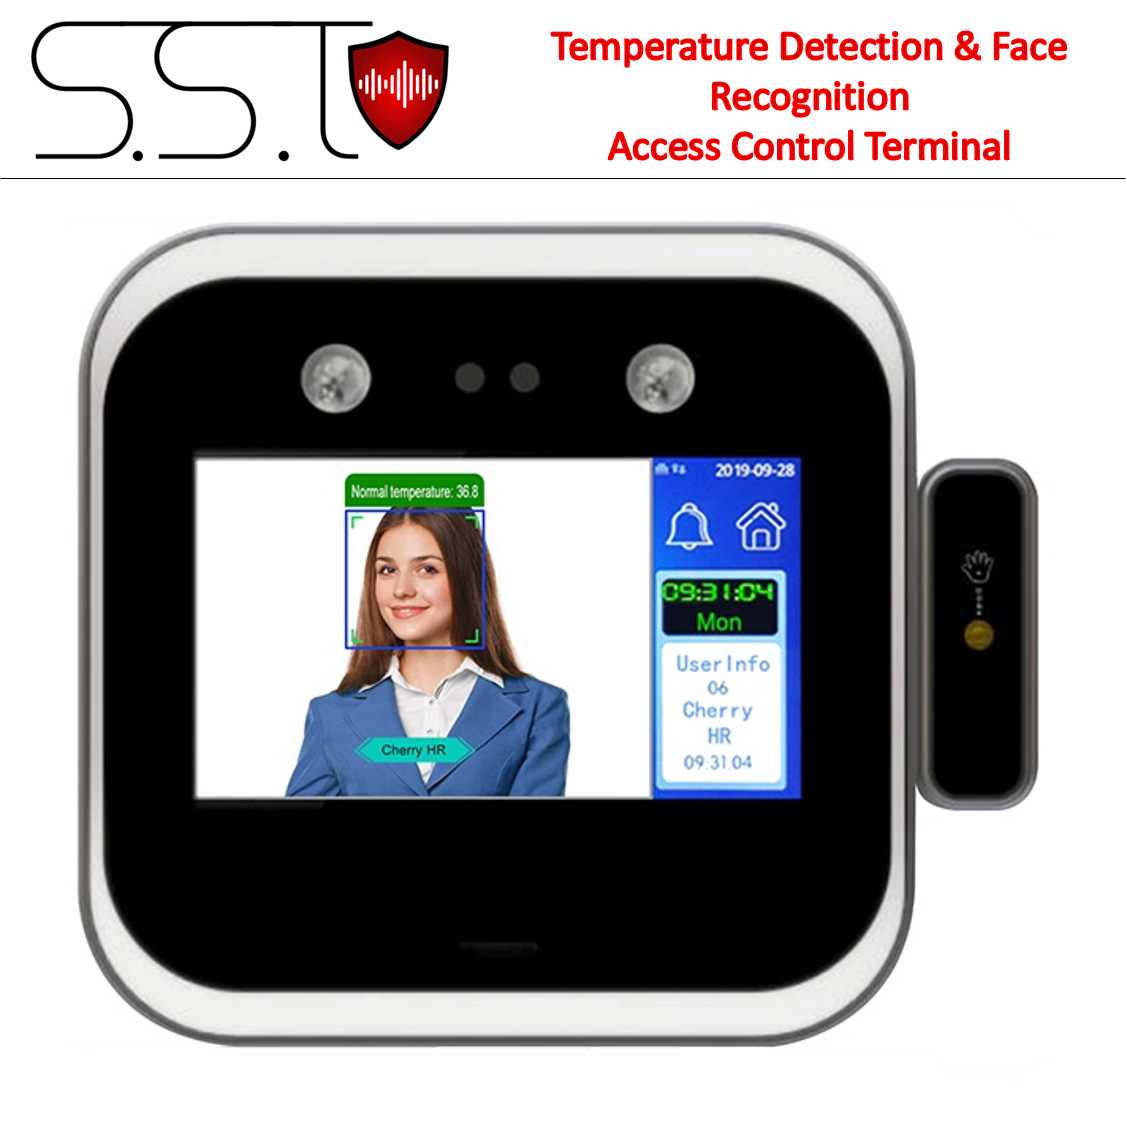 Non-contact Face Recognition Device RFID Card Palm Wrist Temperature Measurement Thermometer For Sale Sound And Safety Technologies Sri Lanka.